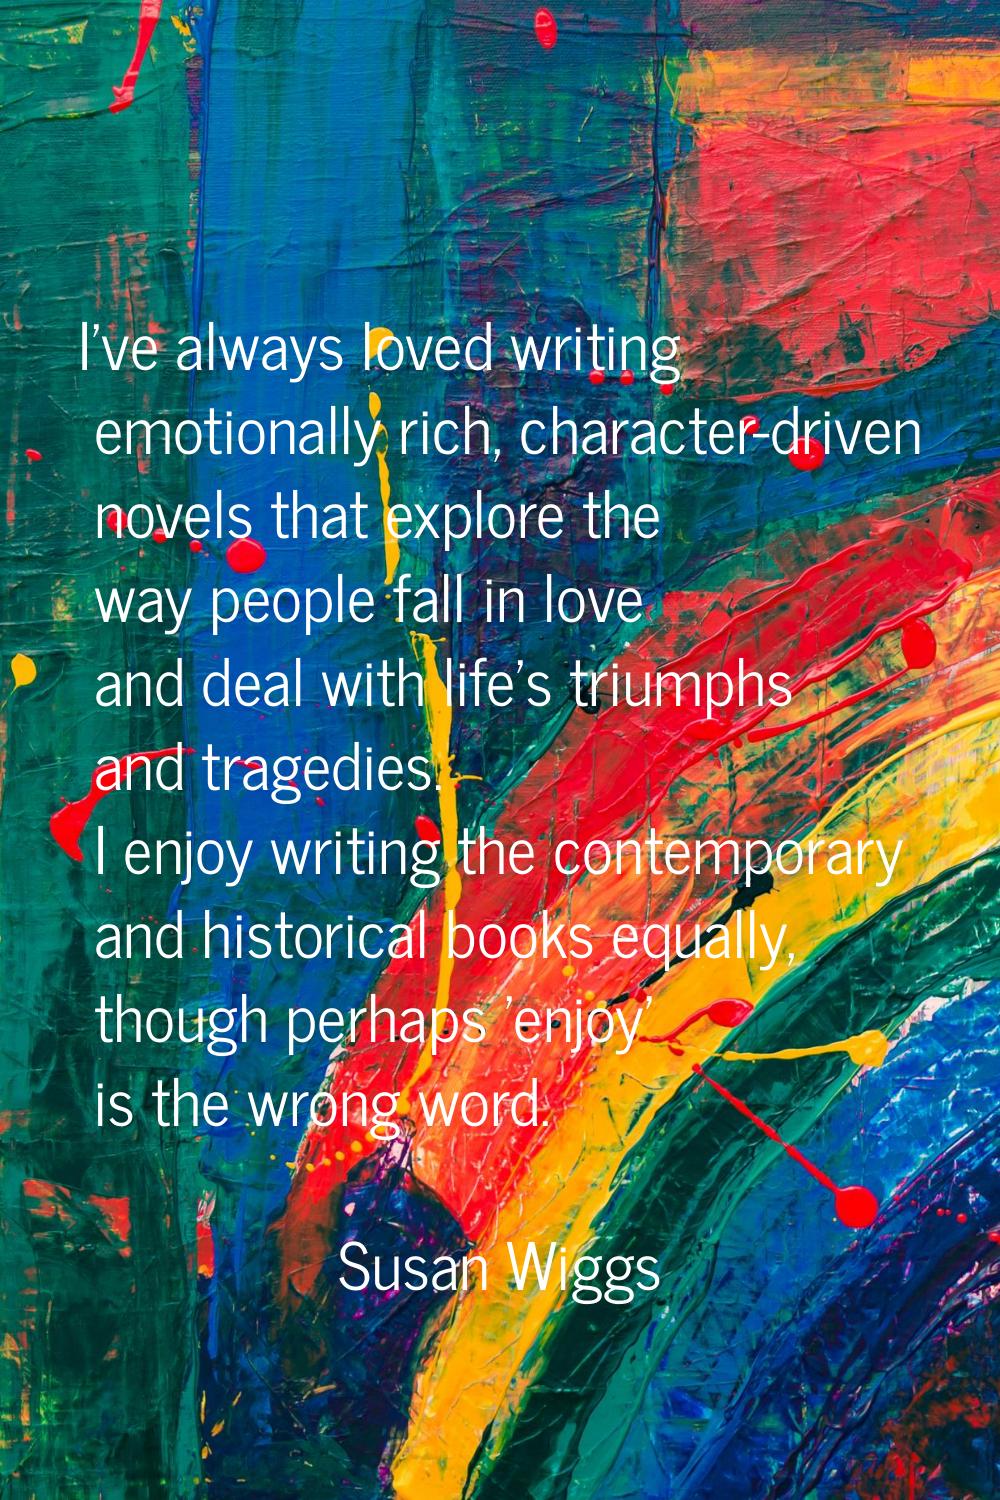 I've always loved writing emotionally rich, character-driven novels that explore the way people fal